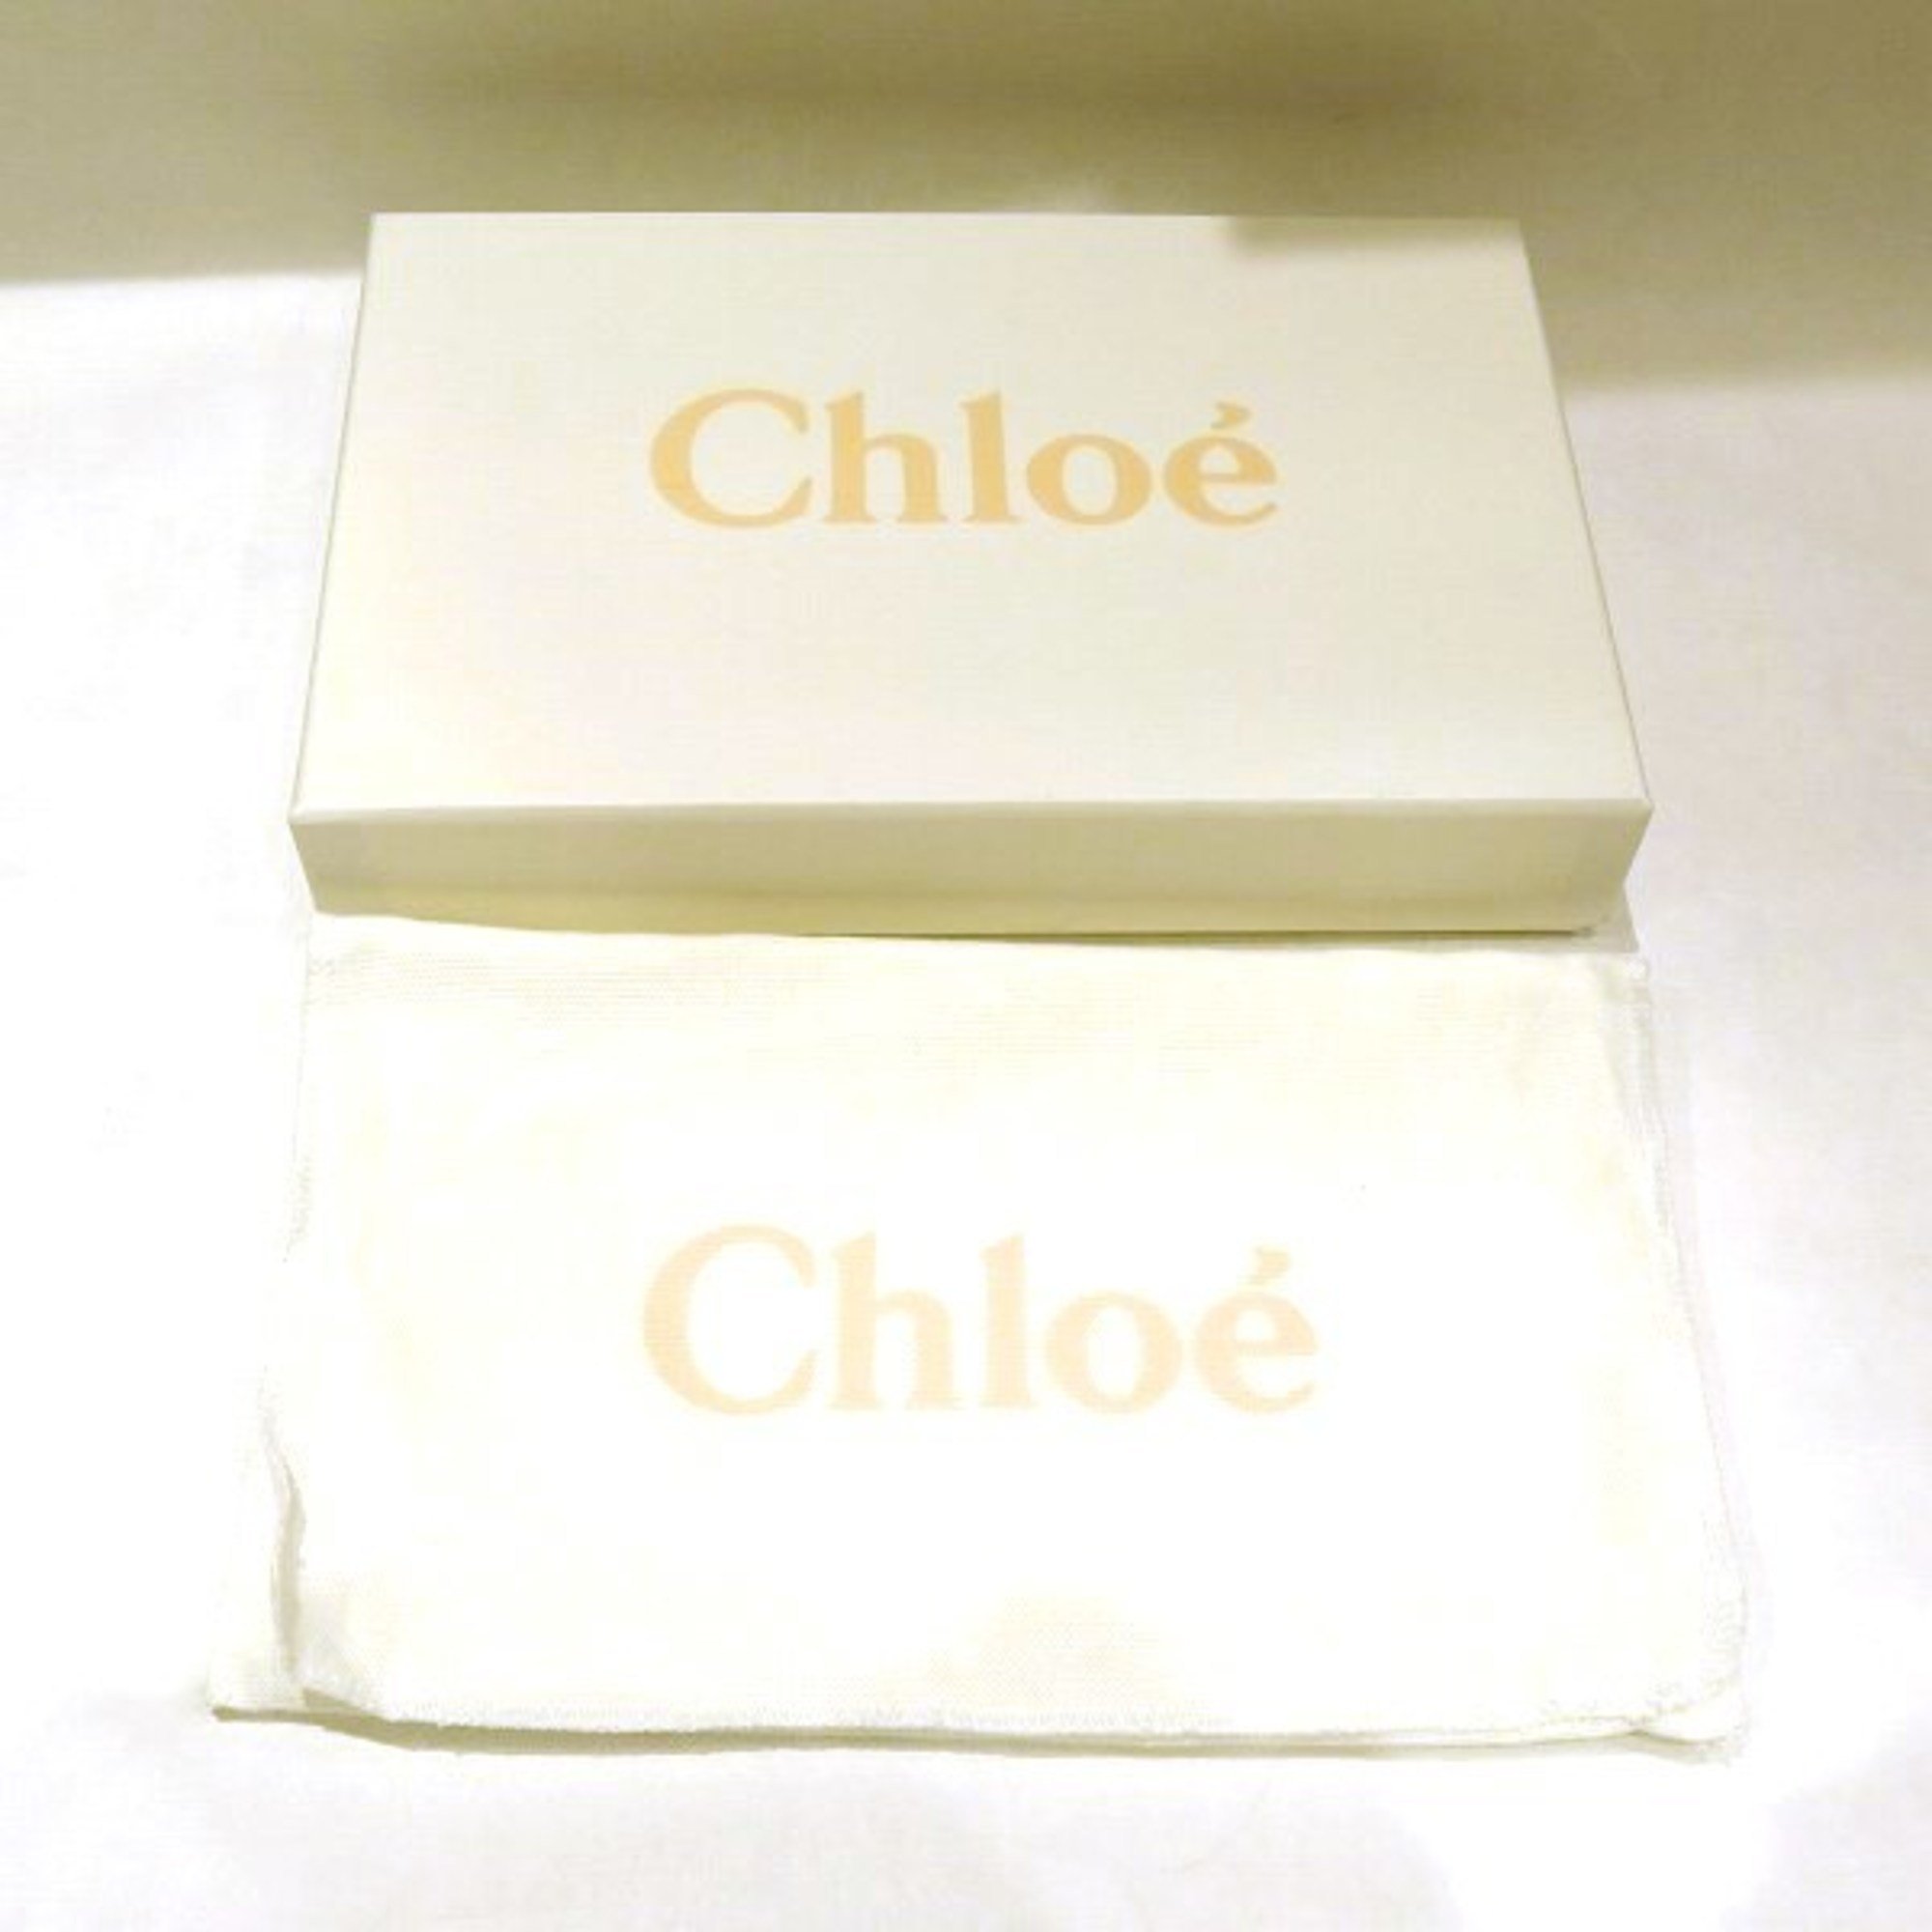 Chloé Chloe Alphabet Quilted Leather Wallet Long for Women